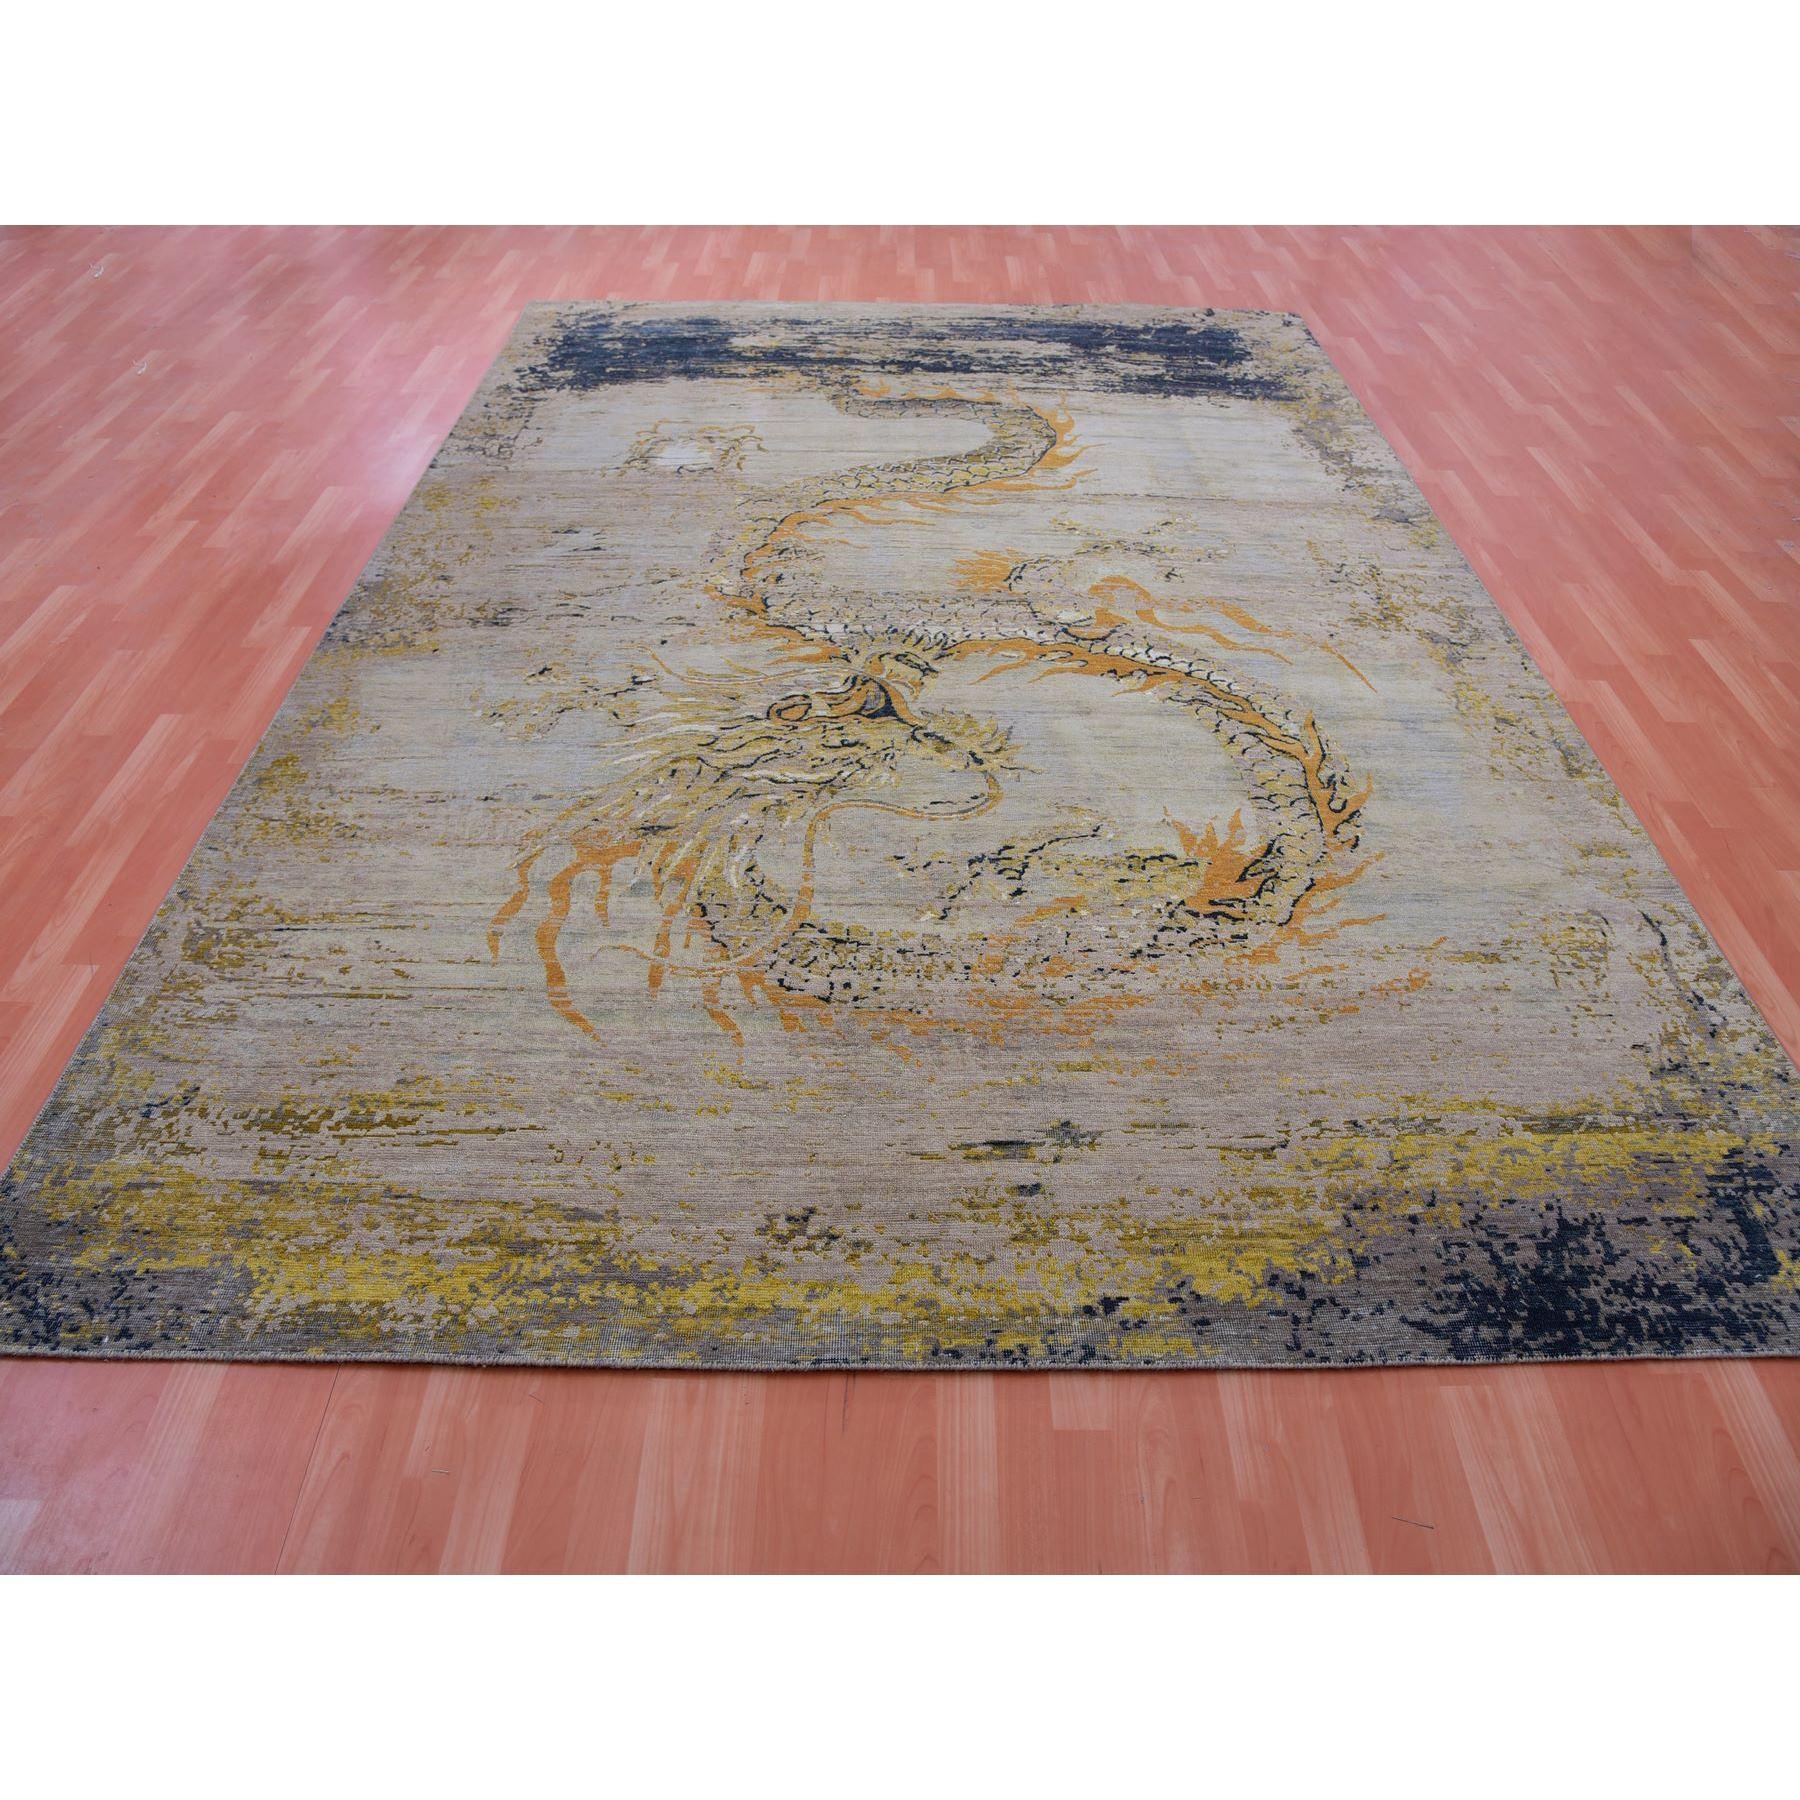 Medieval Beige Antique Chinese Inspired Dragon Design Wool Hand Knotted Rug 9'x12'2